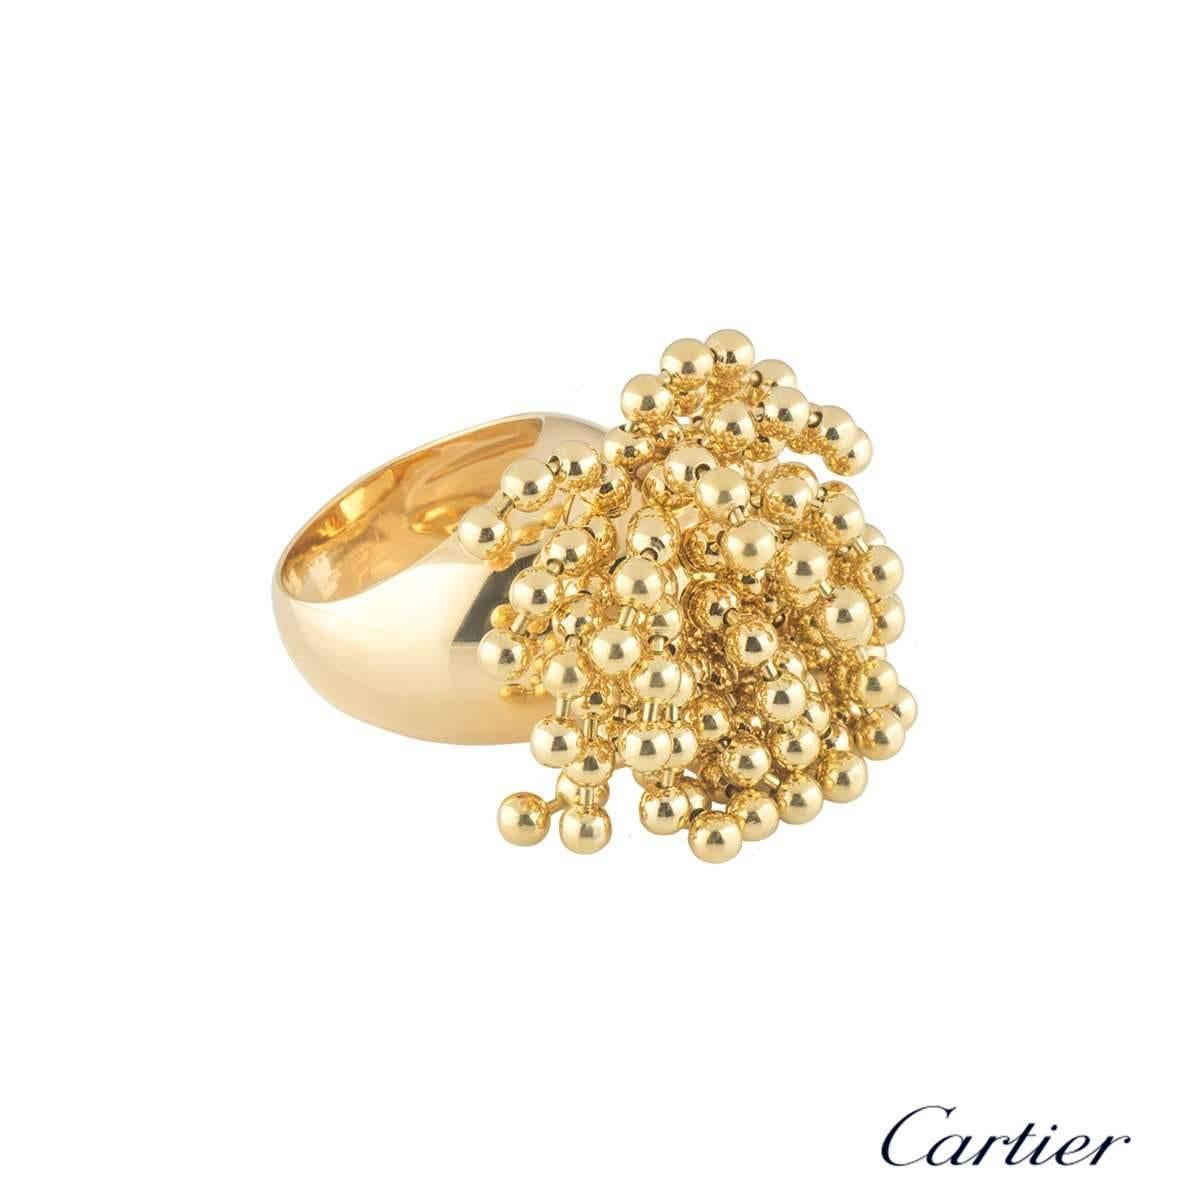 A unique 18k yellow gold ring by Cartier from the Paris Nouvelle Vague collection. The ring features a cluster of flexible bead tassels dispersing from the top over the finger. The ring measures 1.5cm in height and approximately 3cm in width. The